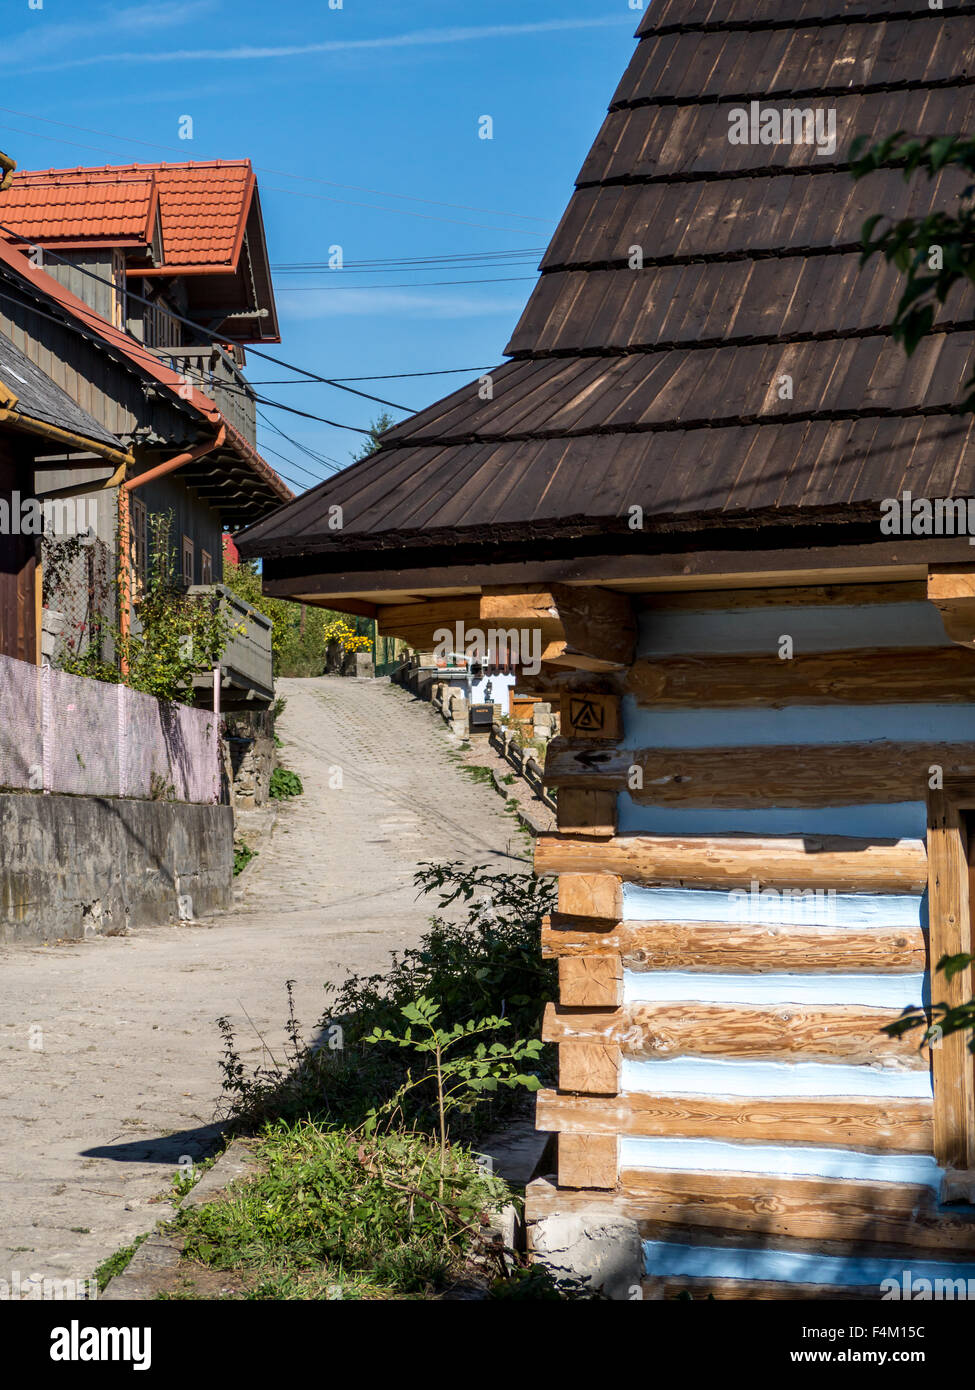 Rural road with wooden cottages in historical village Lanckorona located in the Southern part of Poland Stock Photo